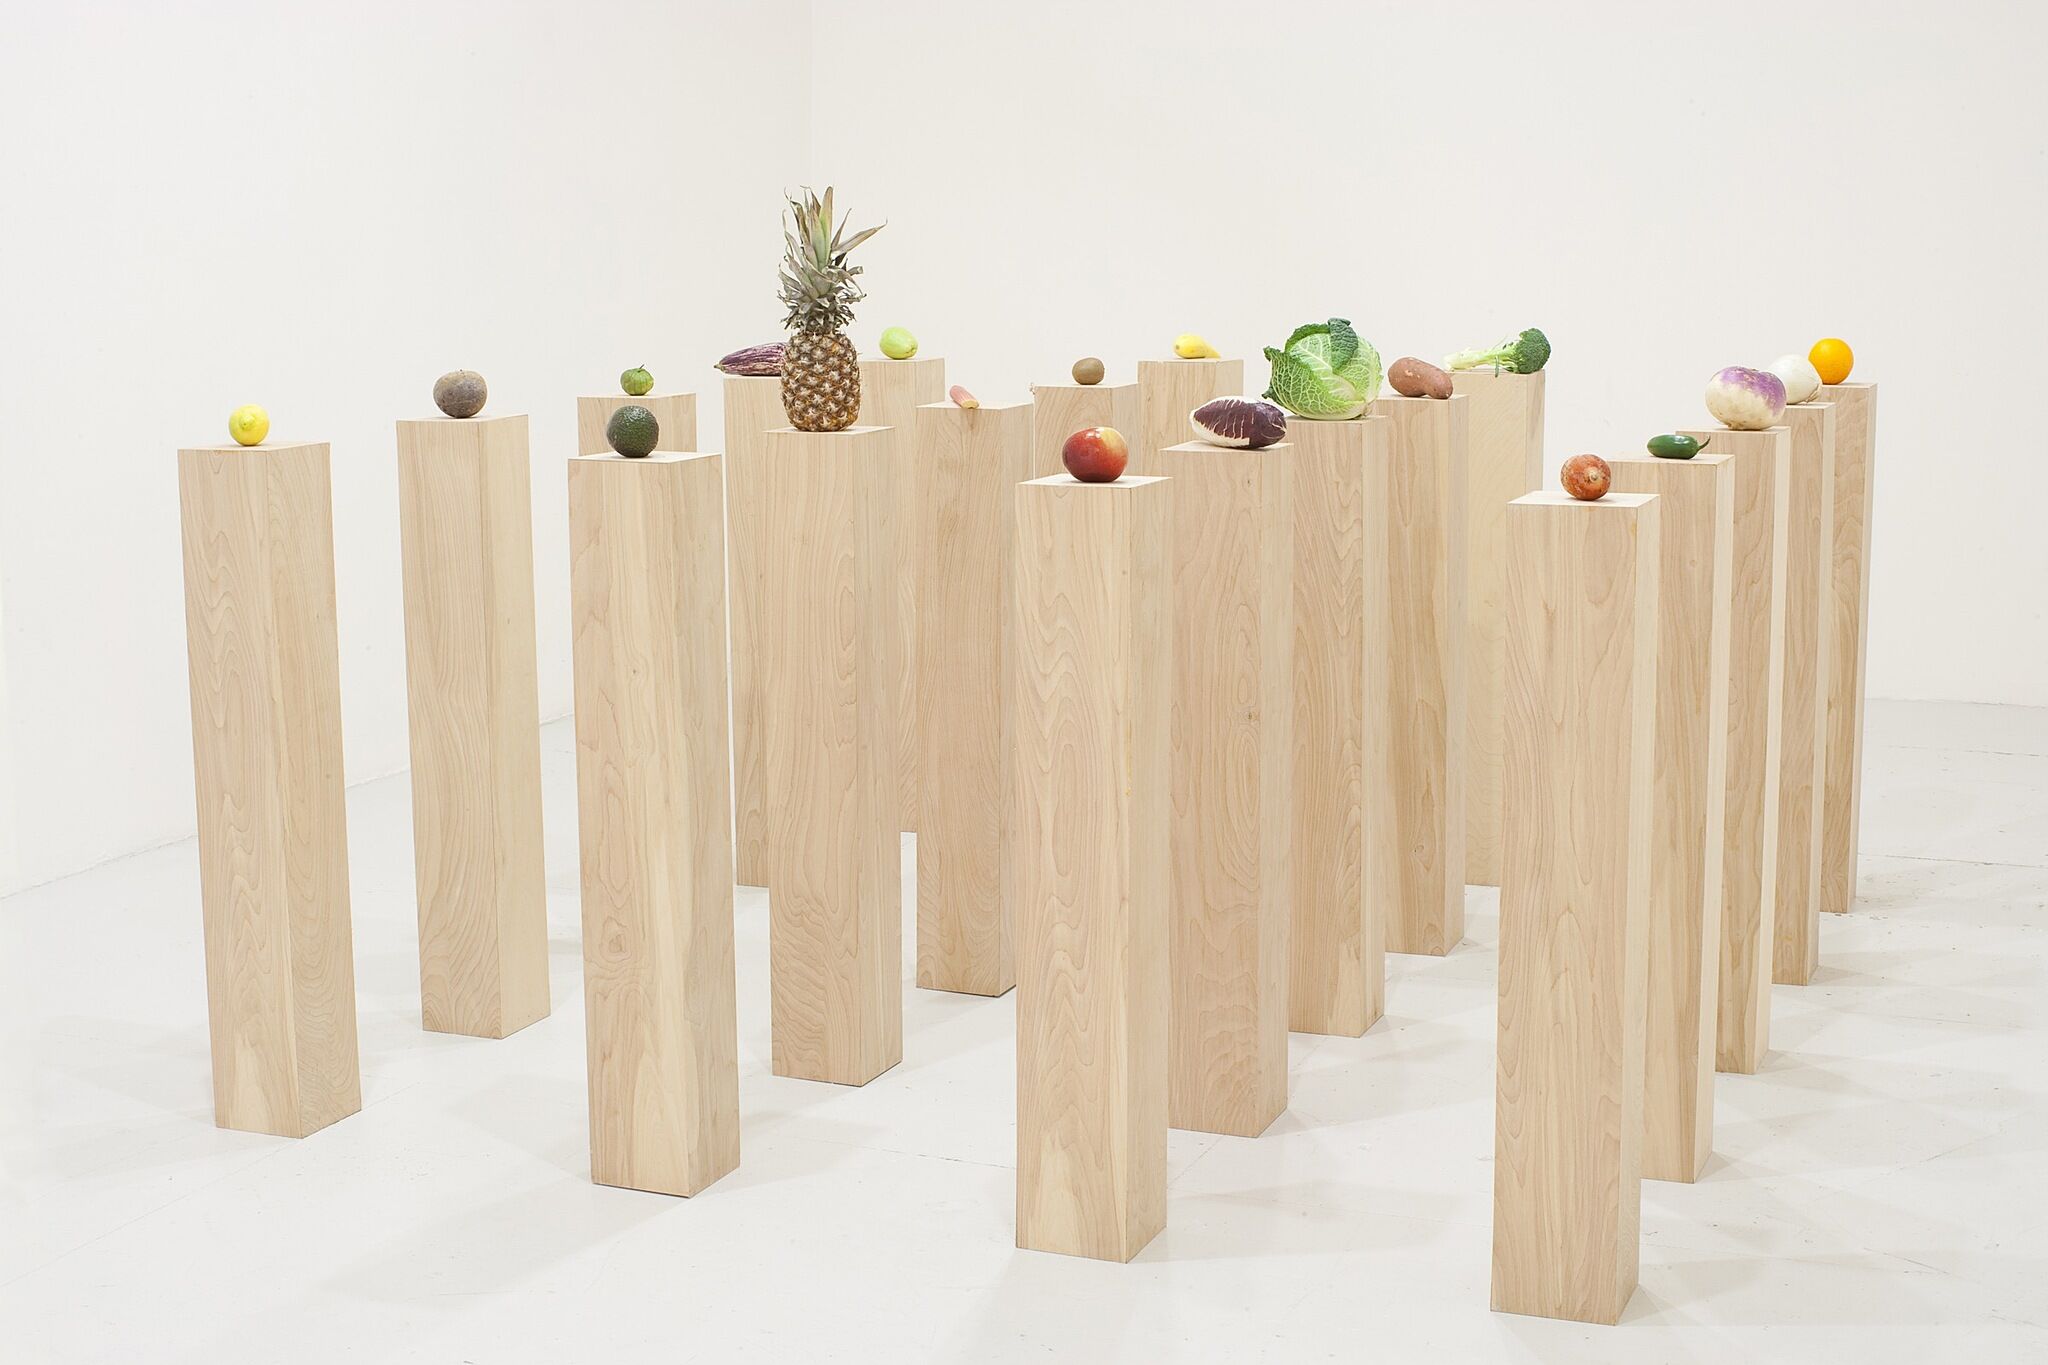 A photo of various fruits and vegetables perched on wood plinths 